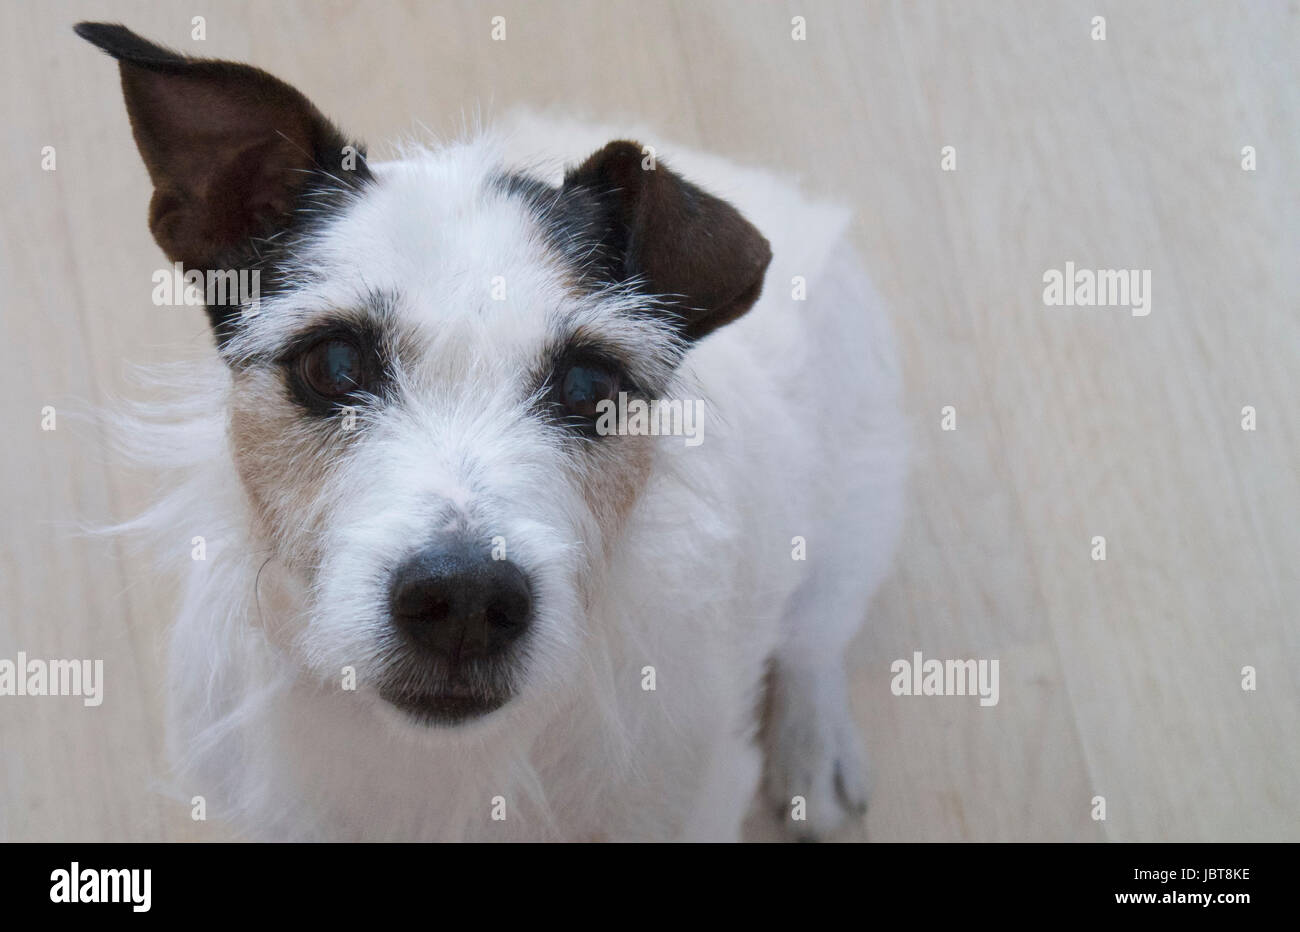 Parson Jack Russell Terrier Stock Photo